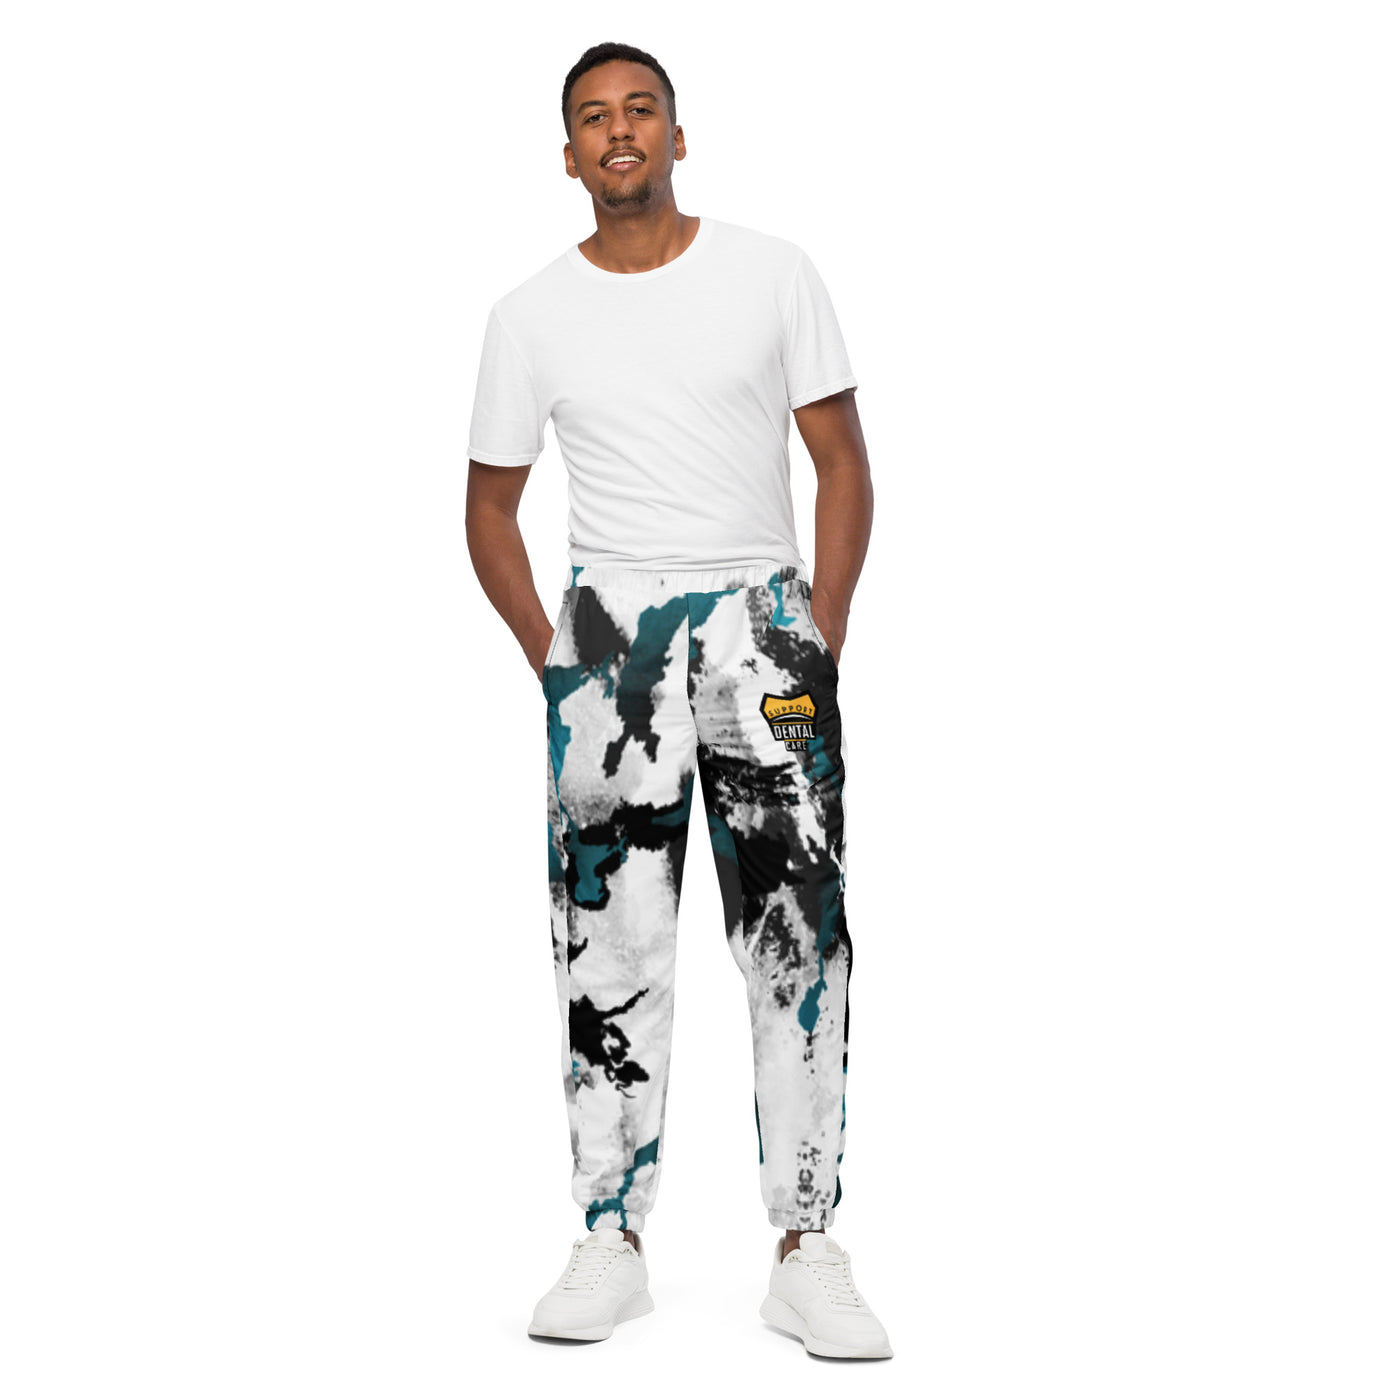 "Support Dental Care" Unisex track pants All-Over Print - Dark night